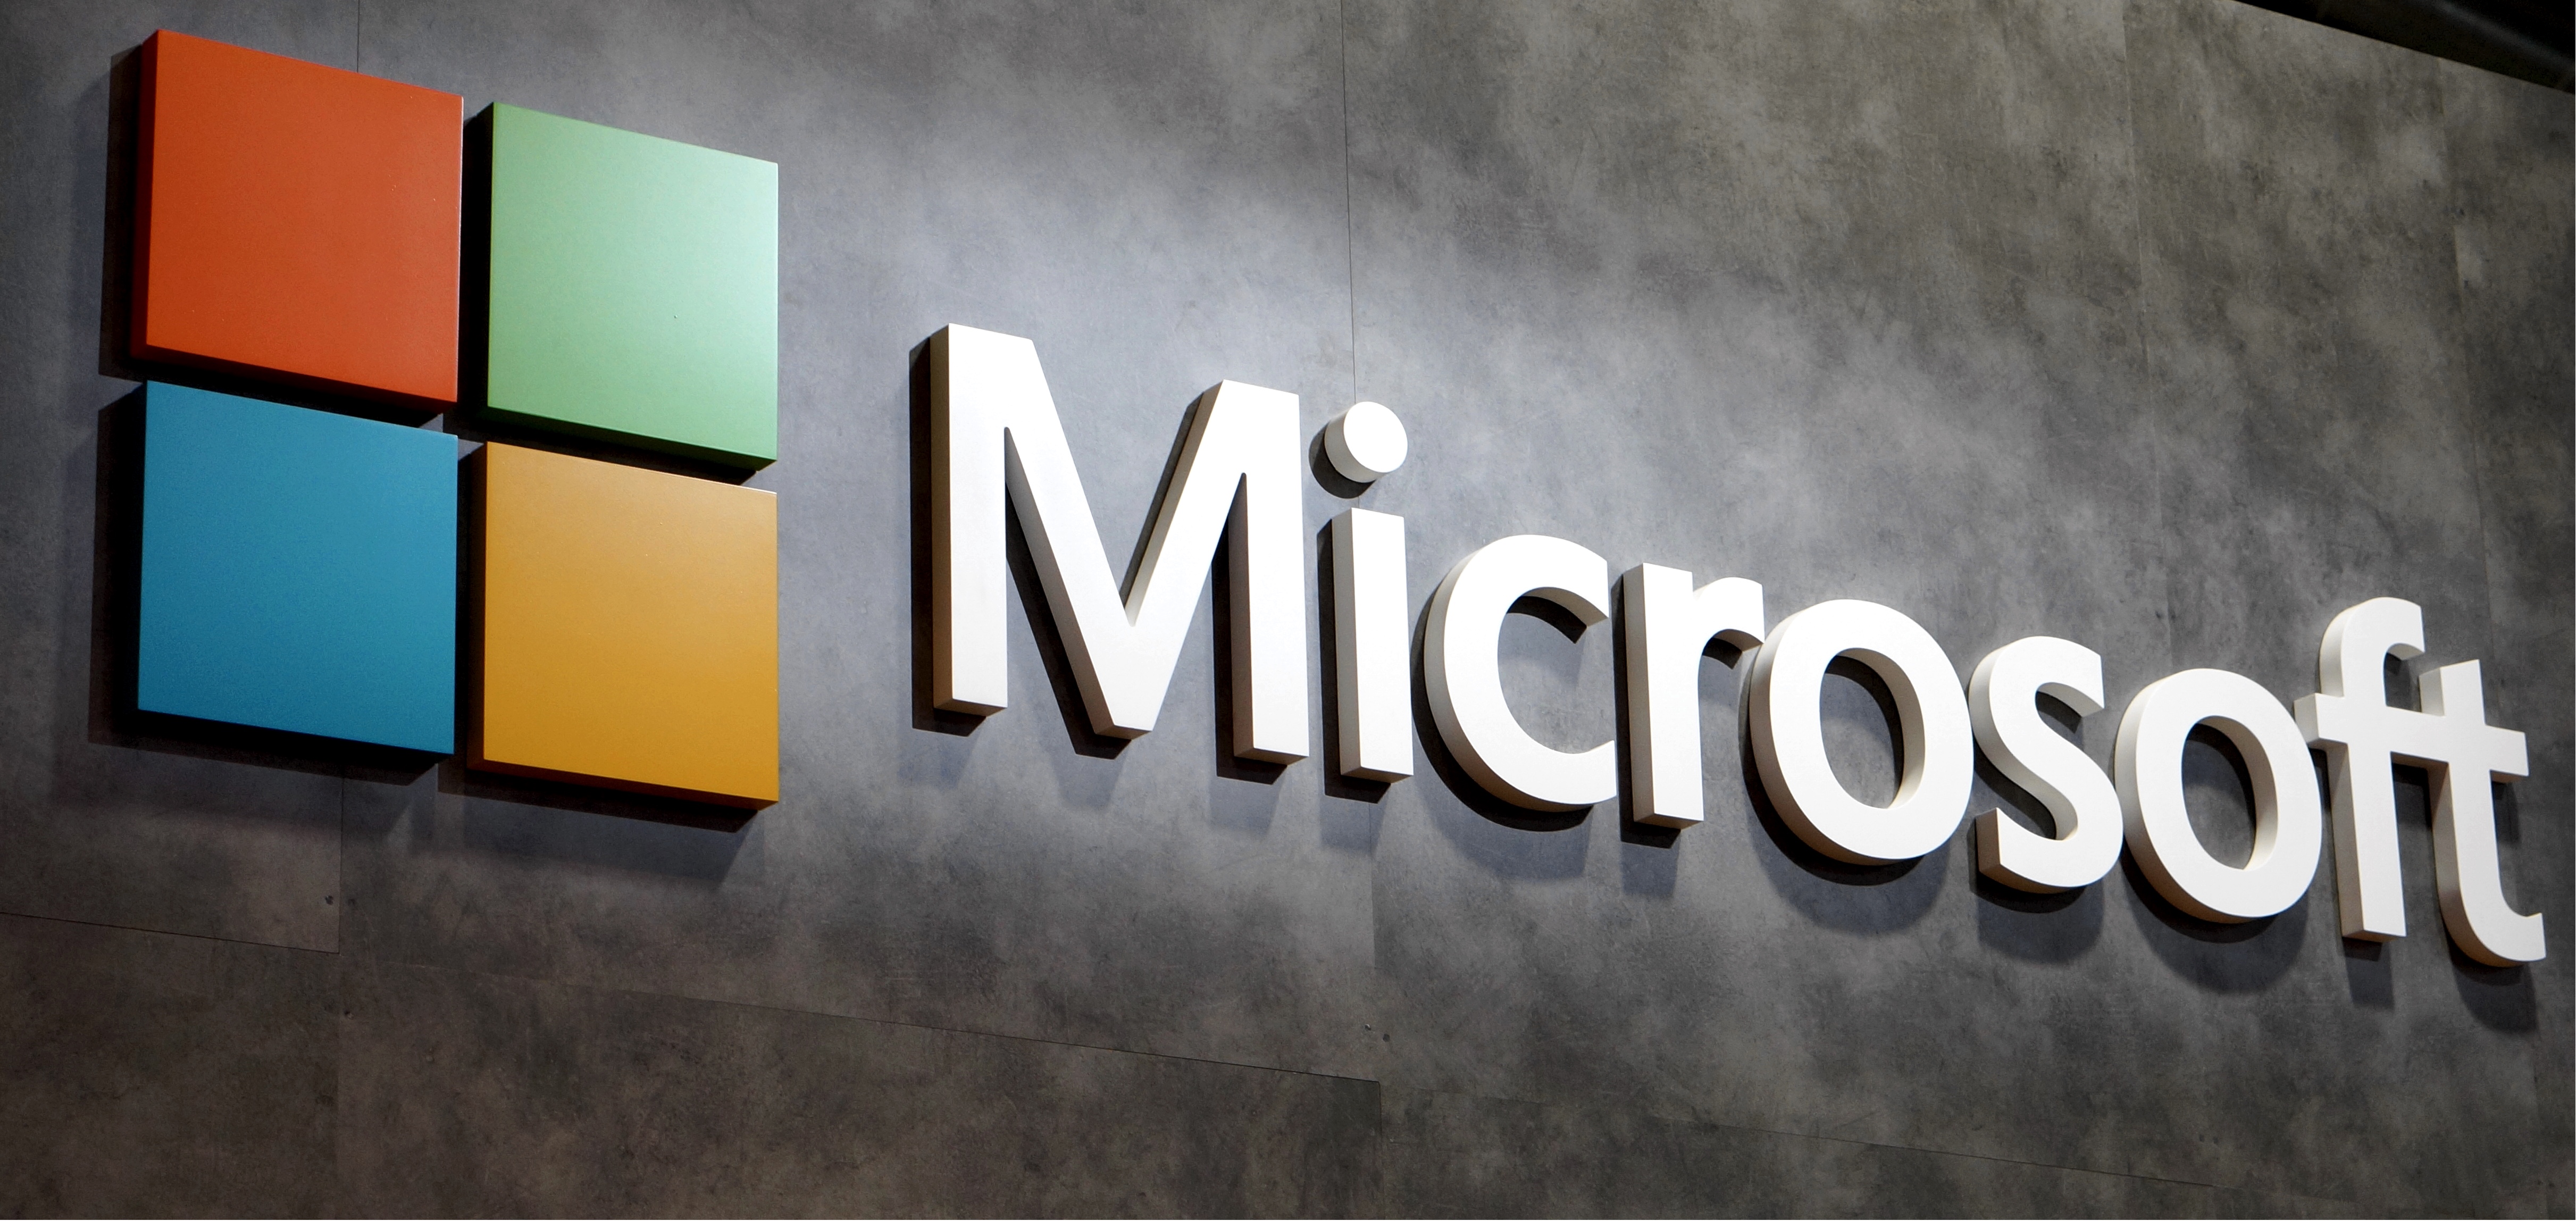 In a significant development, Microsoft on Tuesday acquired Nuance Communications, a speech recognition firm, for $19.7 billion.